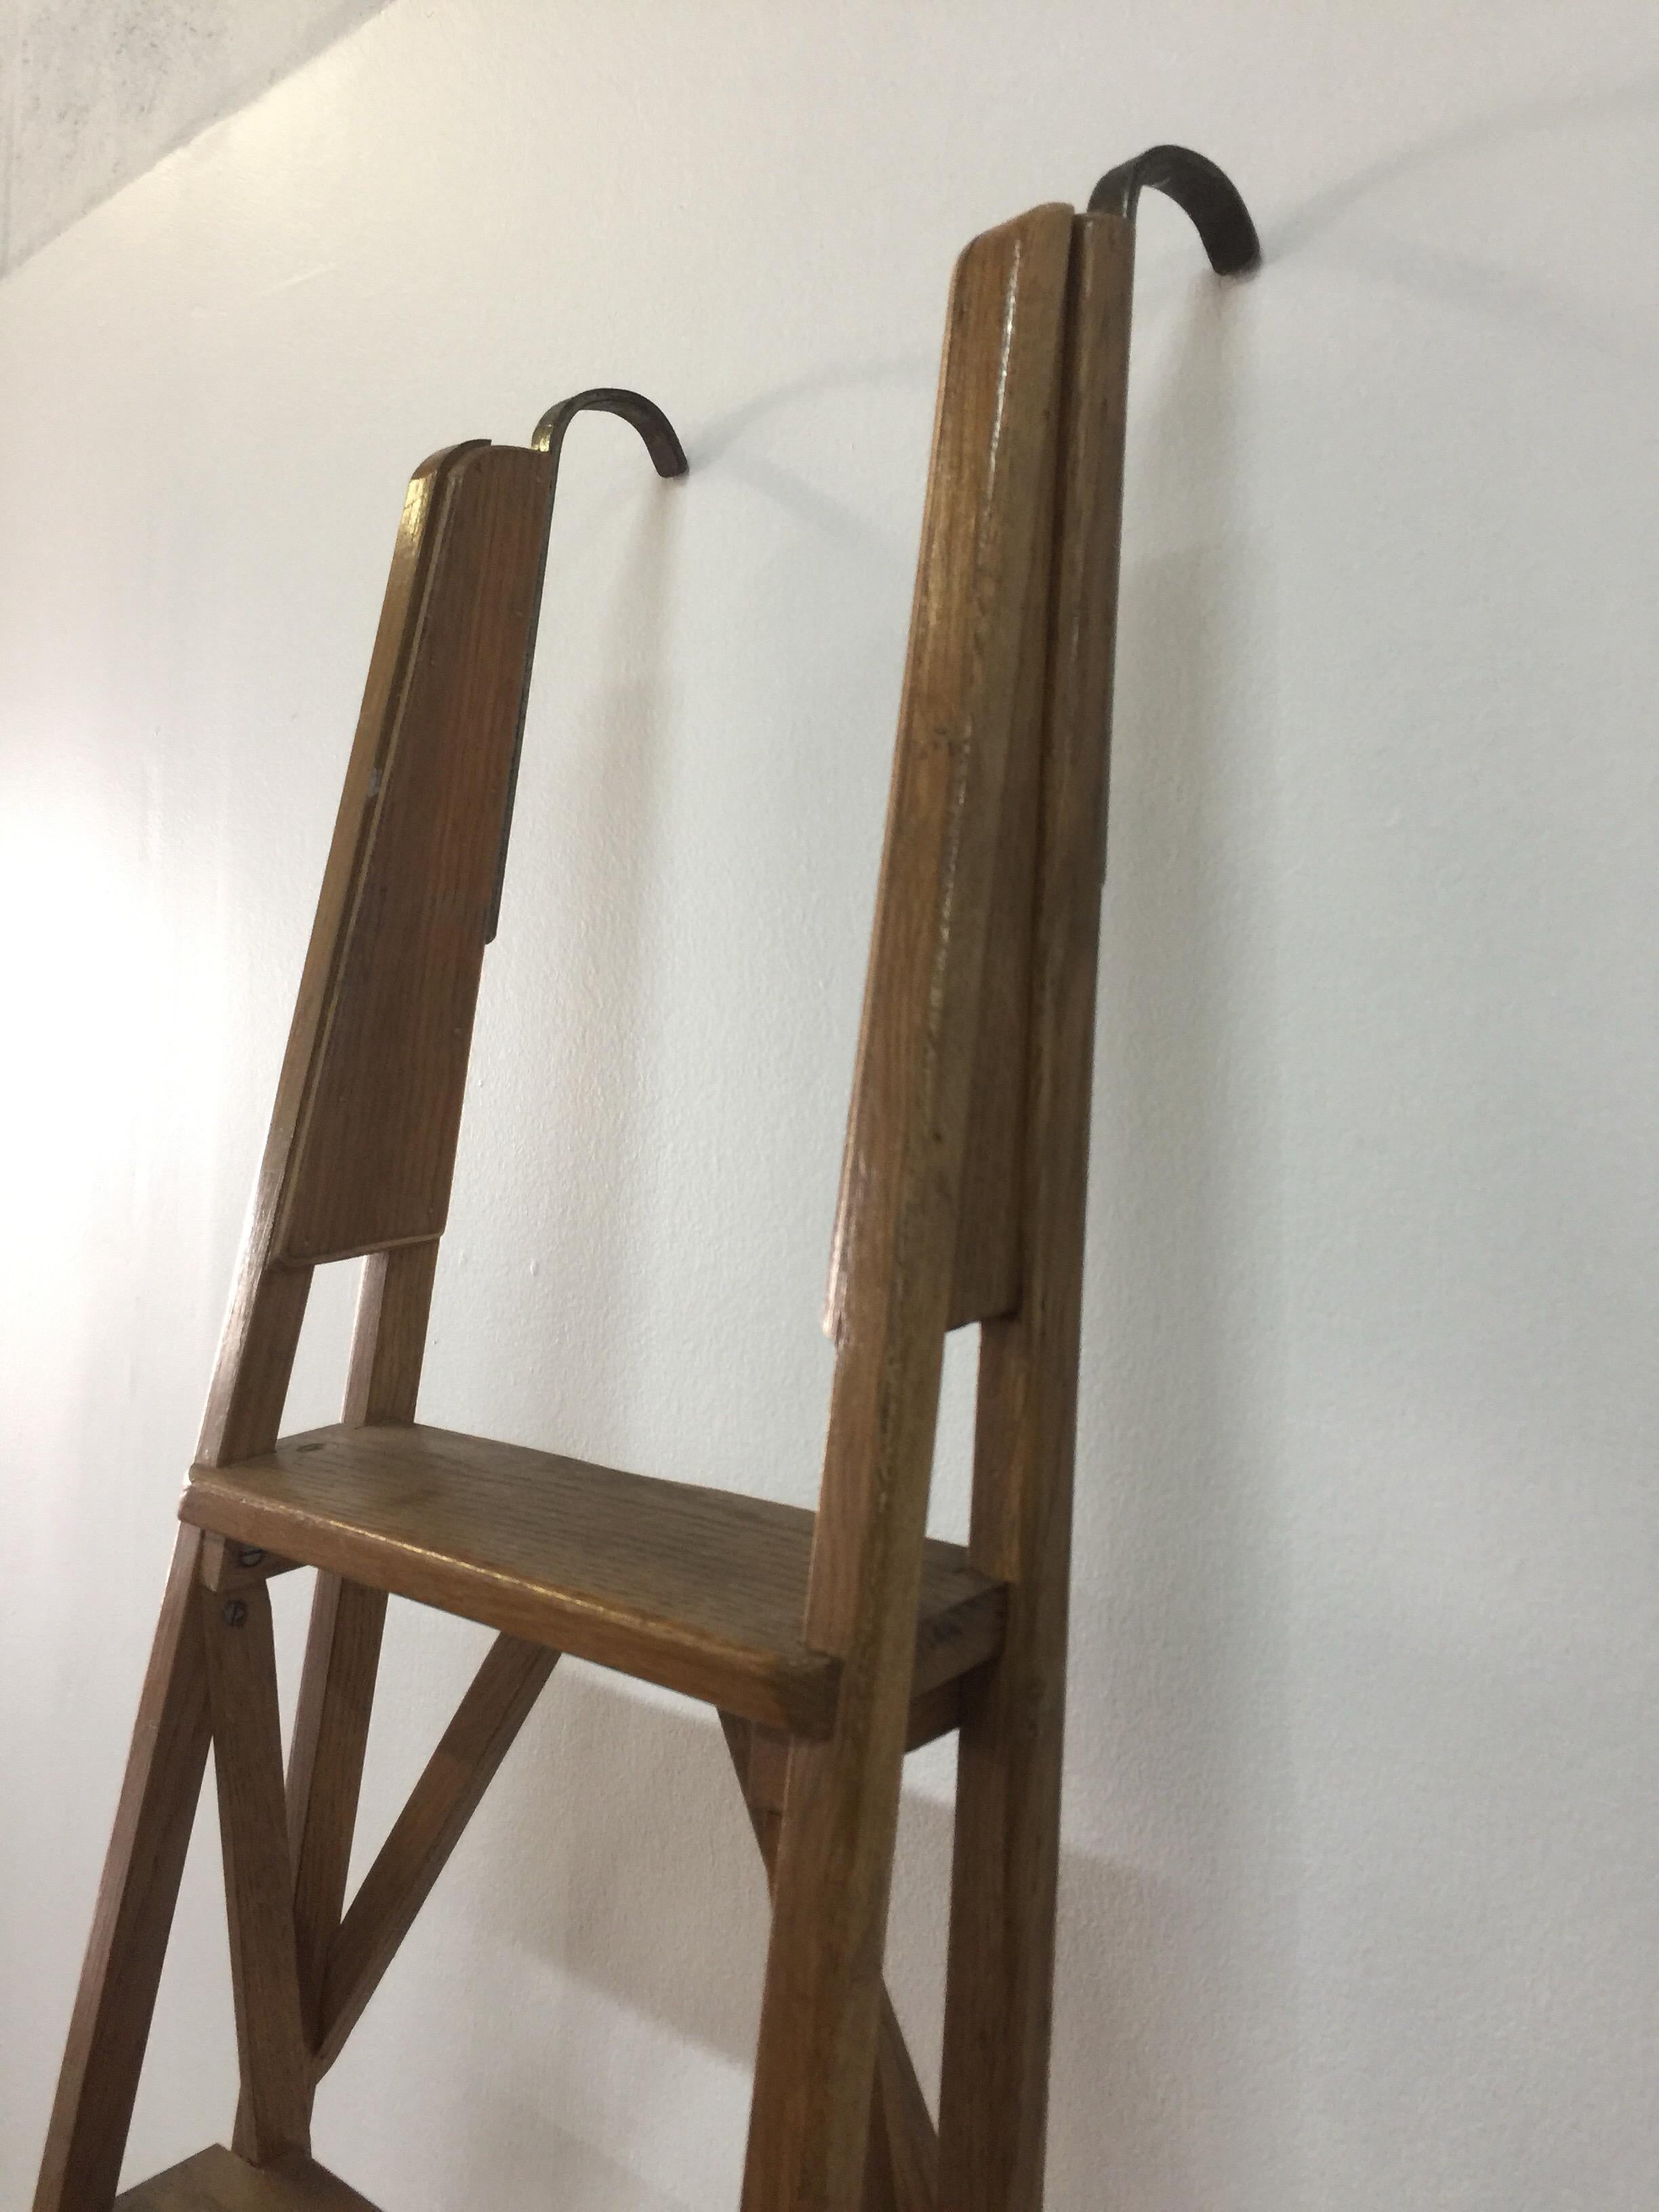 In the manner of Franco Albini, this intricately designed, early made library wall ladder with all original pieces. It originally was held by bar (bar height would be at 78 inches when ladder is leaned at the correct angle against the wall).  The